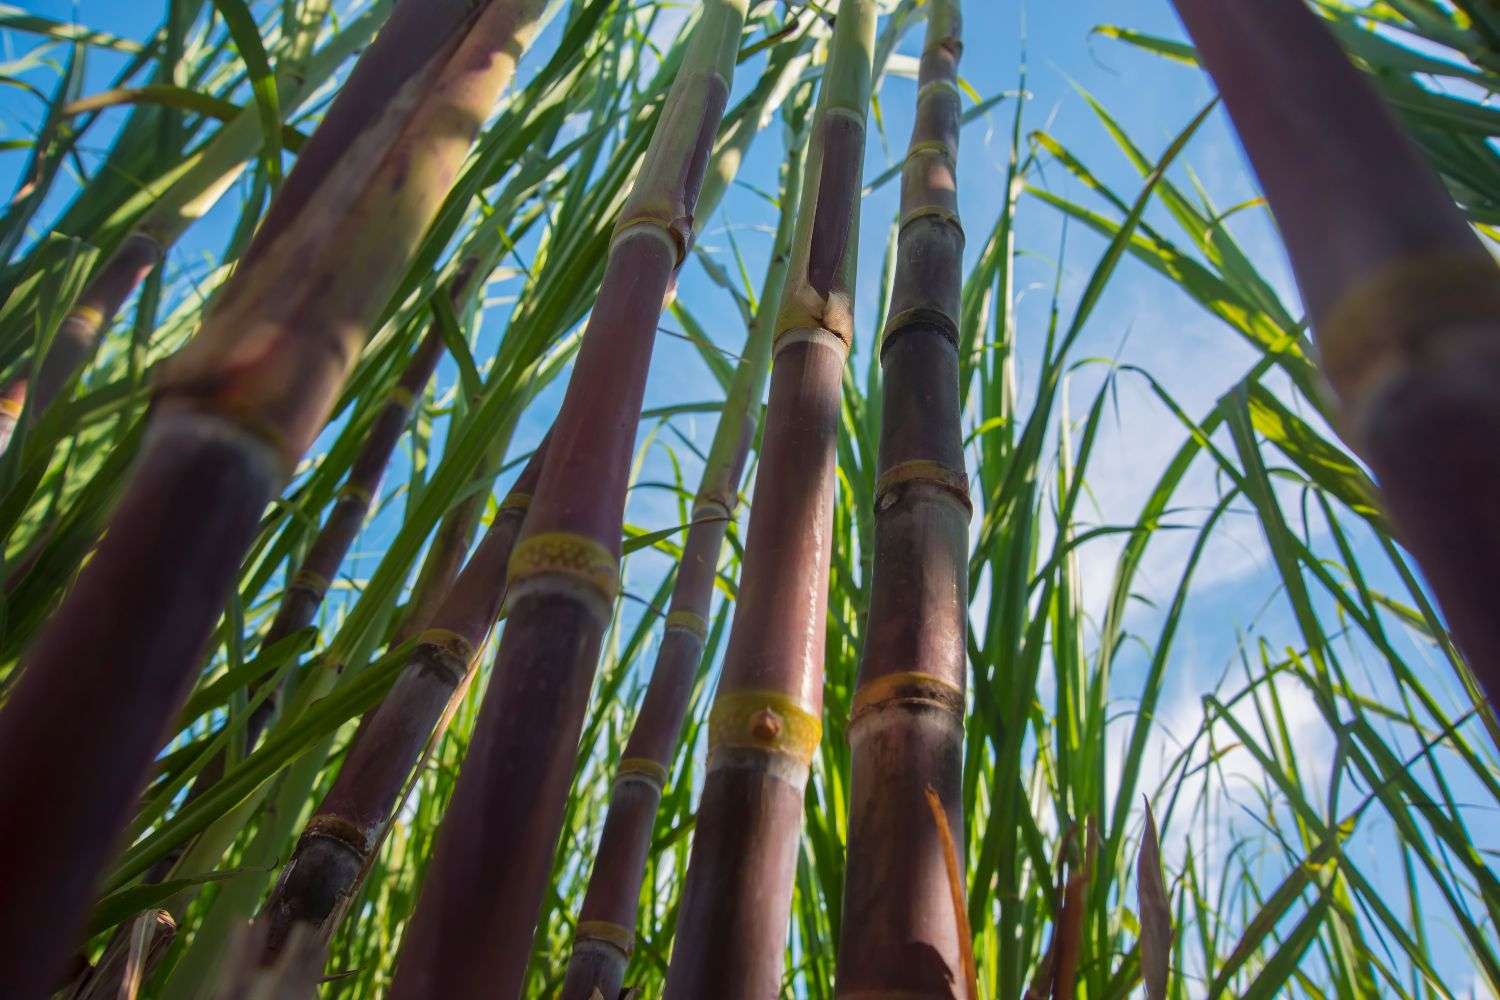 Sugar cane used for factory managing renewable energy in Monta Rosa